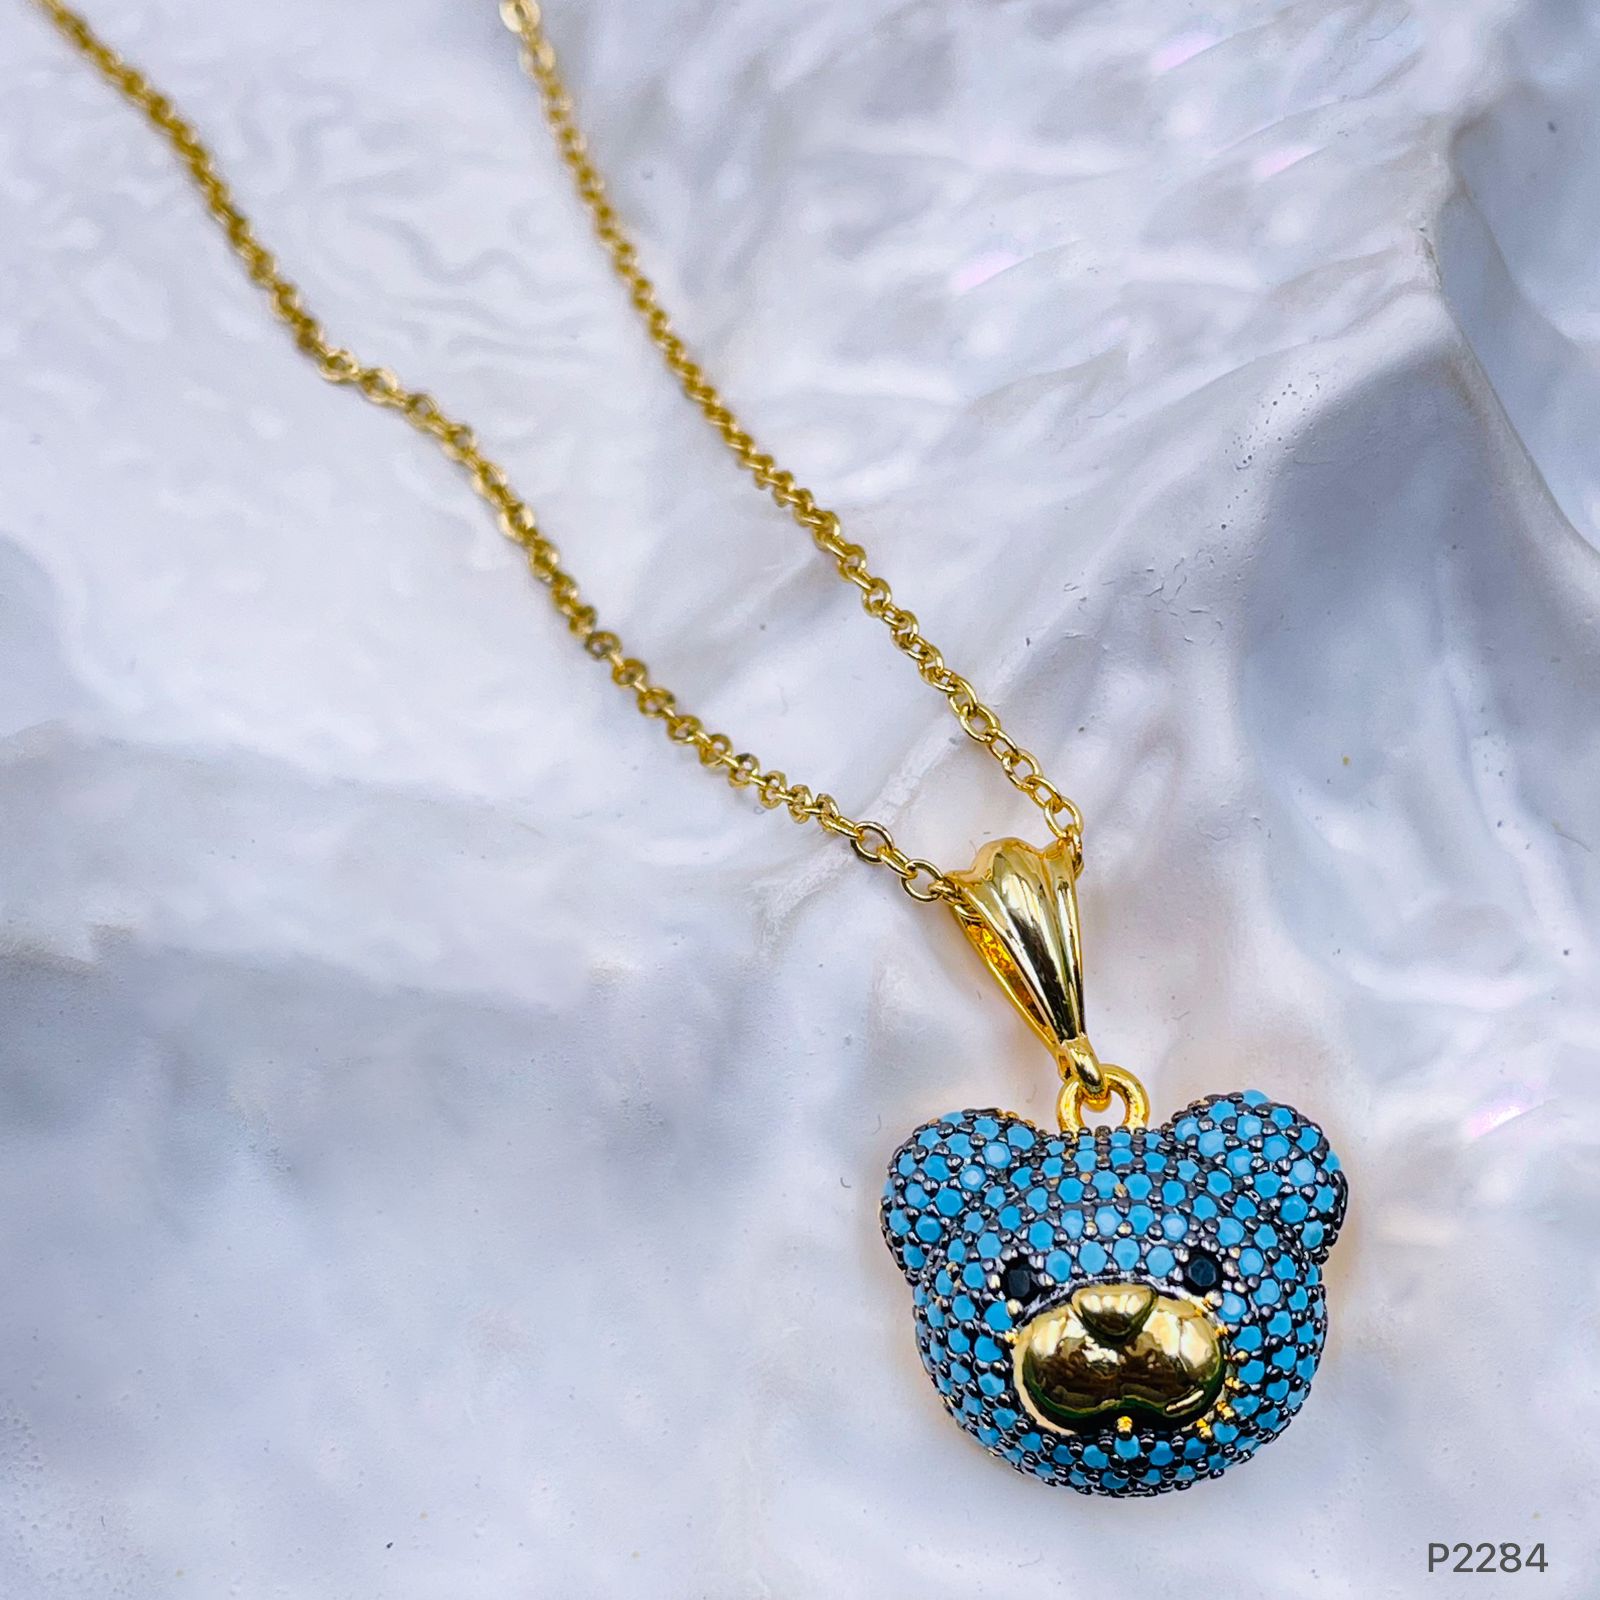 Yellow Gold Teddy Bear Charm Necklace